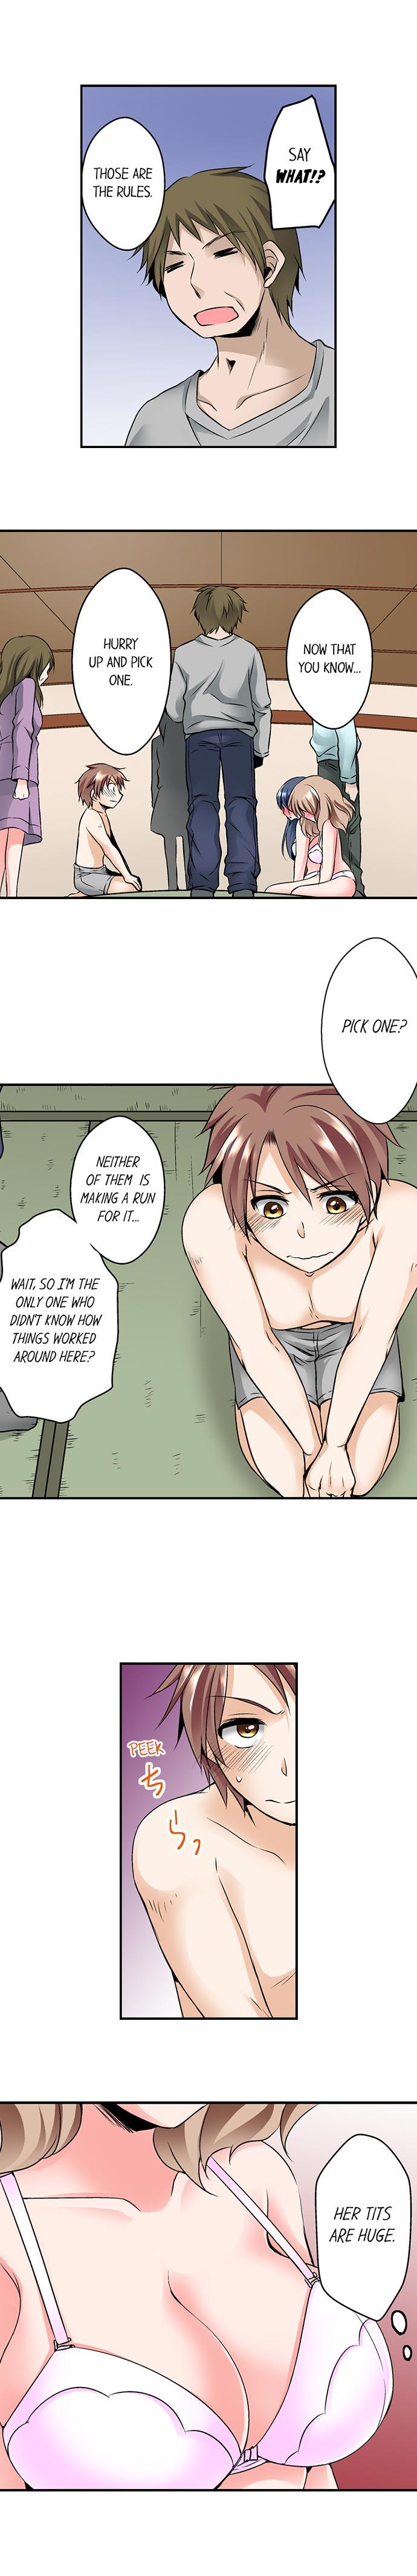 Teenager Naked Matchmaking with My Childhood Friends Ch.11/? Interacial - Page 9